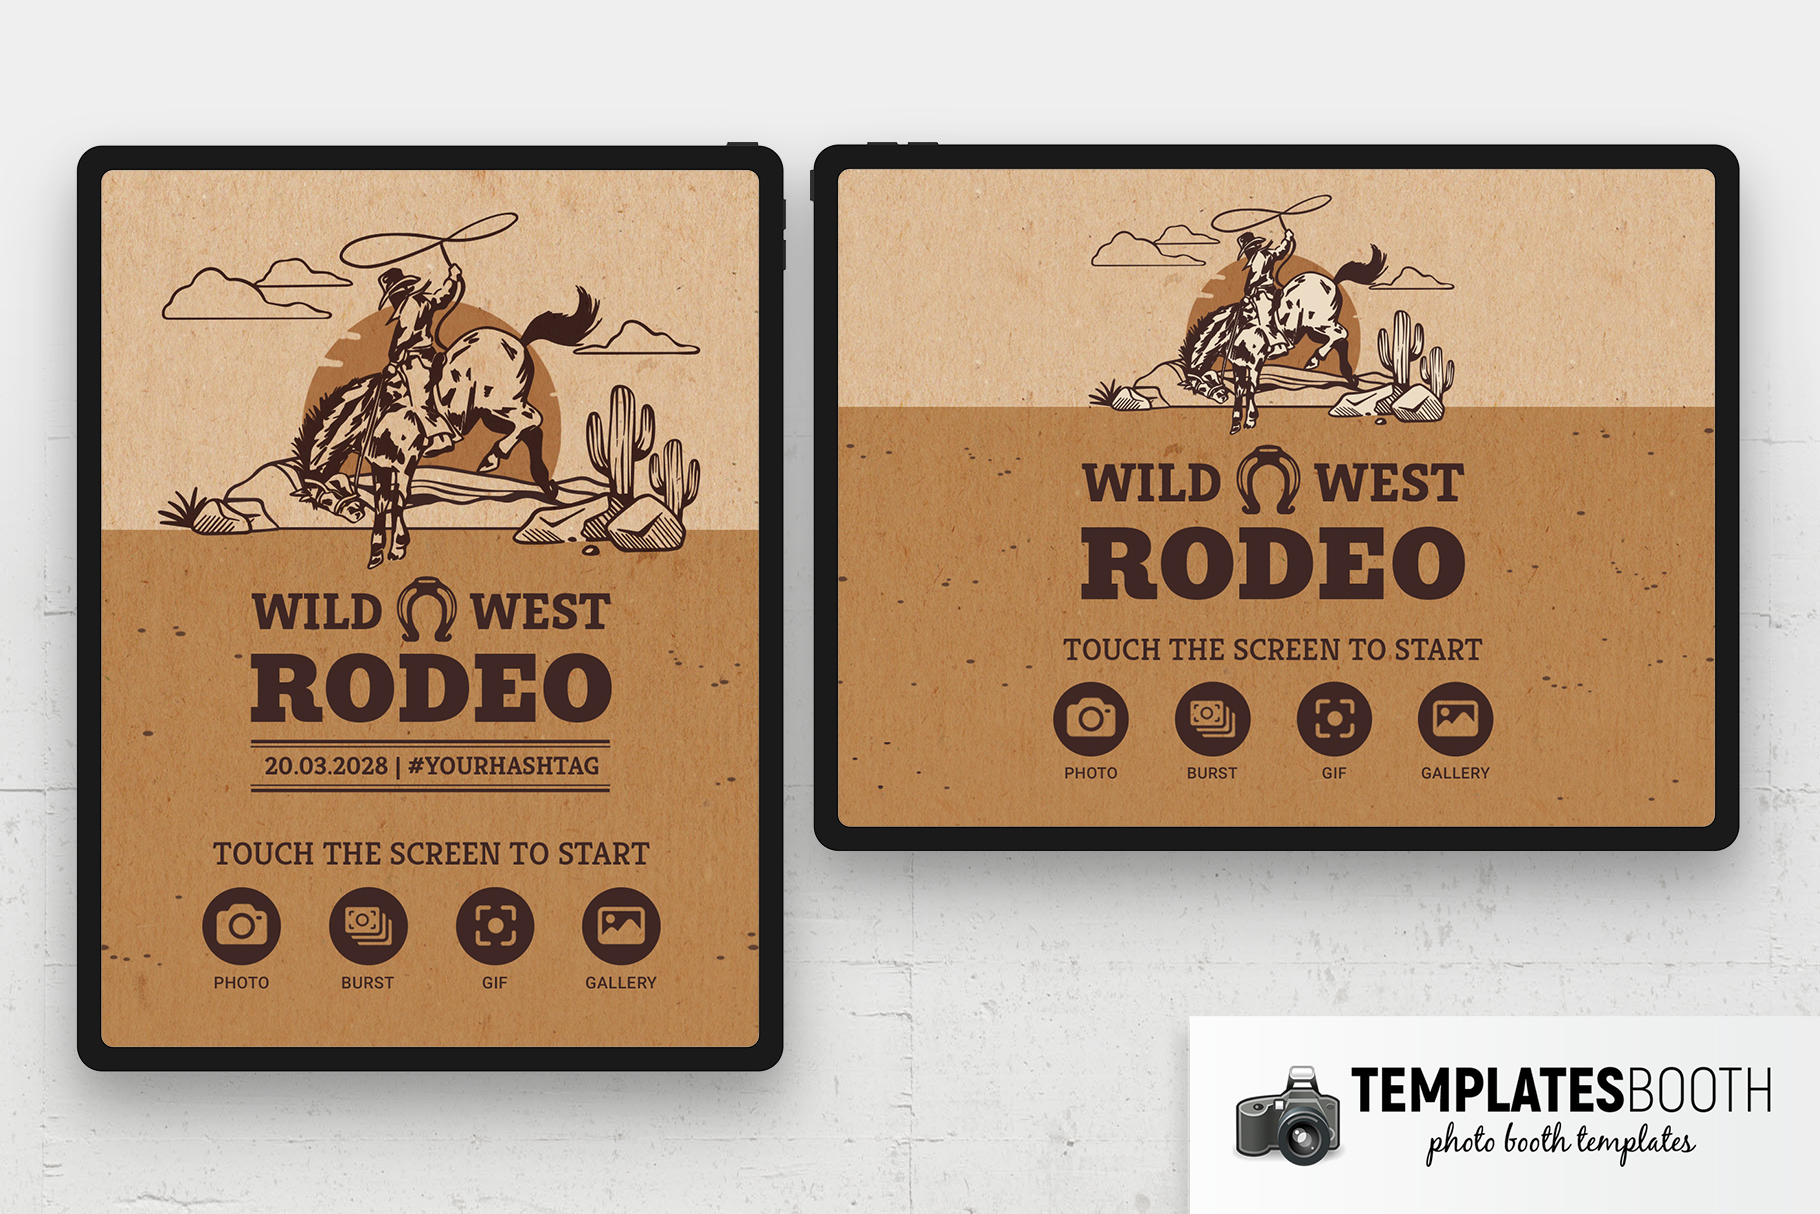 Rodeo Party Photo Booth Welcome Screen